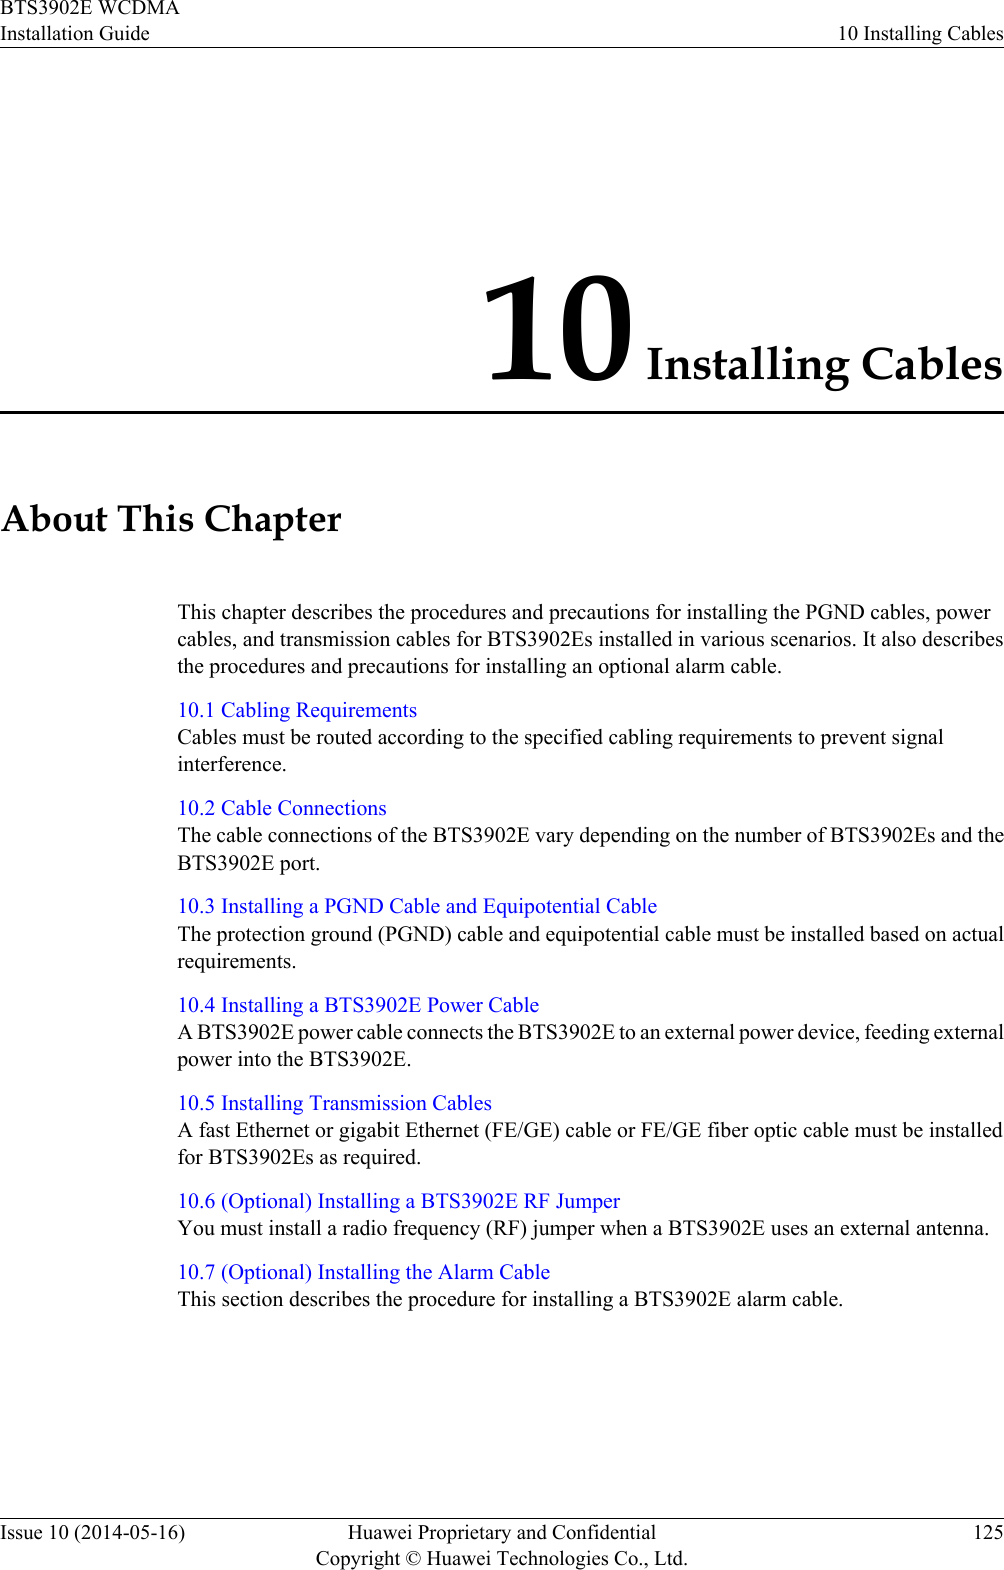 10 Installing CablesAbout This ChapterThis chapter describes the procedures and precautions for installing the PGND cables, powercables, and transmission cables for BTS3902Es installed in various scenarios. It also describesthe procedures and precautions for installing an optional alarm cable.10.1 Cabling RequirementsCables must be routed according to the specified cabling requirements to prevent signalinterference.10.2 Cable ConnectionsThe cable connections of the BTS3902E vary depending on the number of BTS3902Es and theBTS3902E port.10.3 Installing a PGND Cable and Equipotential CableThe protection ground (PGND) cable and equipotential cable must be installed based on actualrequirements.10.4 Installing a BTS3902E Power CableA BTS3902E power cable connects the BTS3902E to an external power device, feeding externalpower into the BTS3902E.10.5 Installing Transmission CablesA fast Ethernet or gigabit Ethernet (FE/GE) cable or FE/GE fiber optic cable must be installedfor BTS3902Es as required.10.6 (Optional) Installing a BTS3902E RF JumperYou must install a radio frequency (RF) jumper when a BTS3902E uses an external antenna.10.7 (Optional) Installing the Alarm CableThis section describes the procedure for installing a BTS3902E alarm cable.BTS3902E WCDMAInstallation Guide 10 Installing CablesIssue 10 (2014-05-16) Huawei Proprietary and ConfidentialCopyright © Huawei Technologies Co., Ltd.125